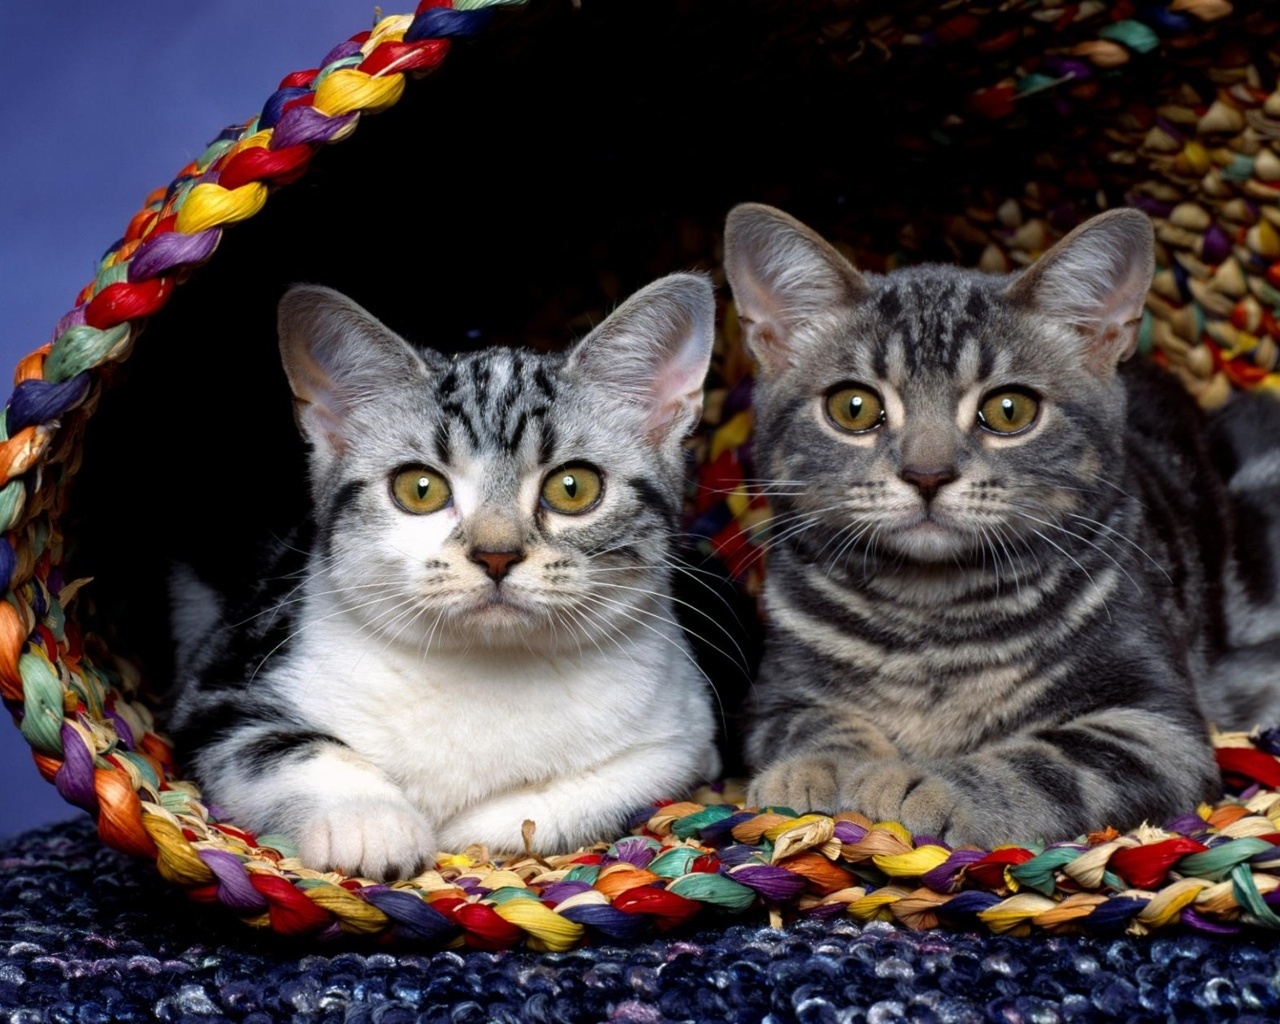 Cats in basket for 1280 x 1024 resolution